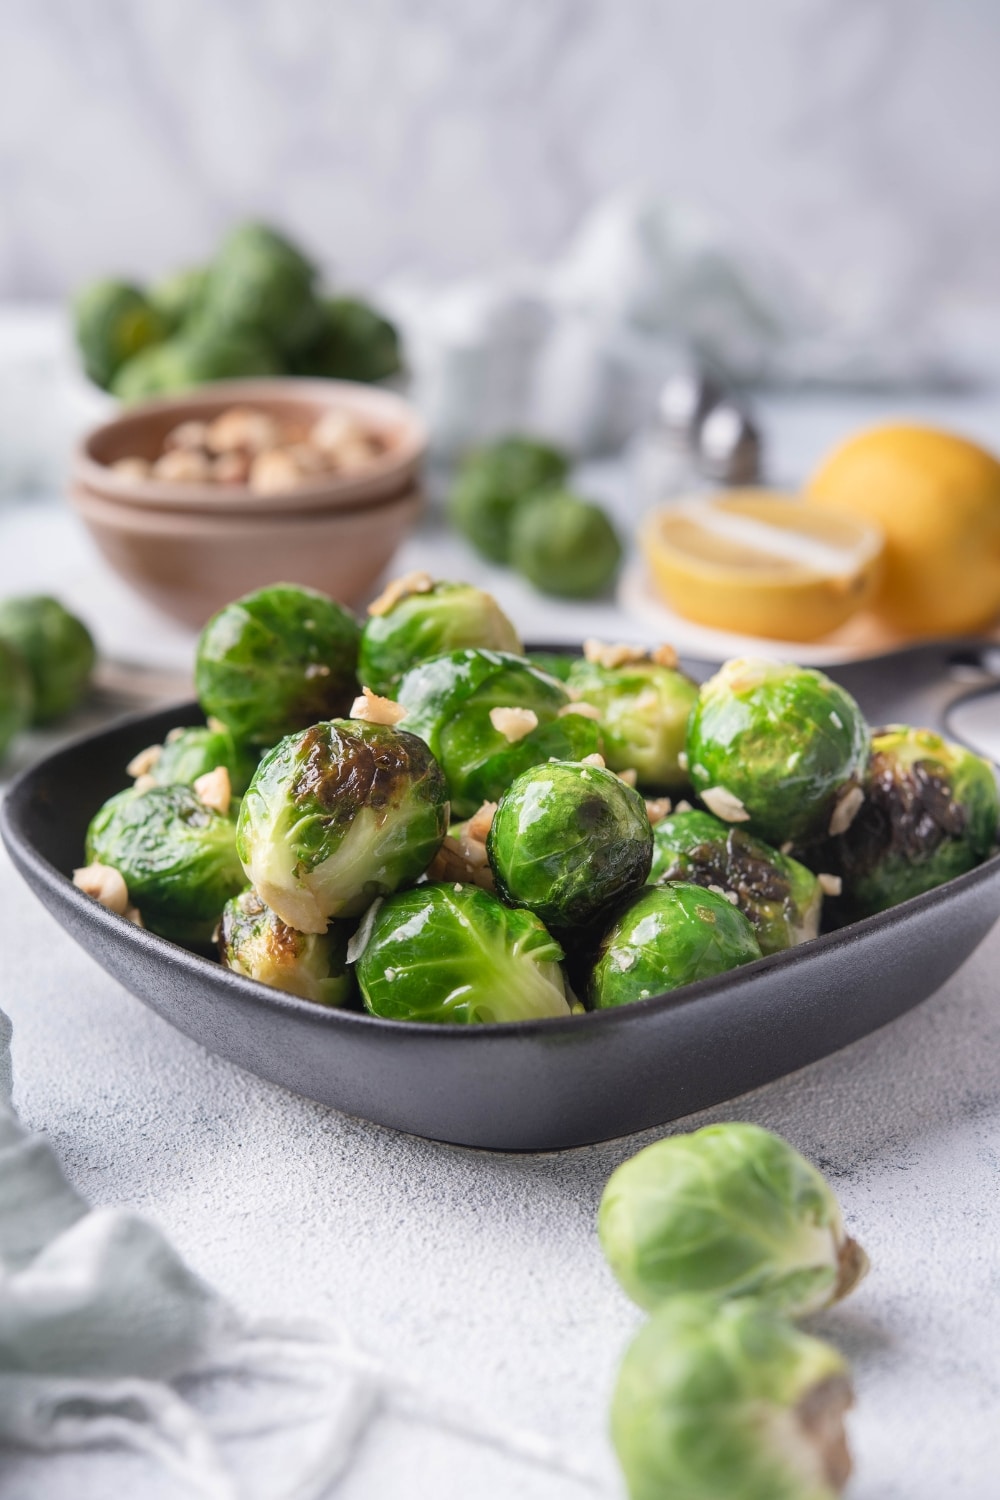 Sauteed brussels sprouts garnished with chopped hazlnuts in a small square cast iron skillet. Surrounding the pan are whole uncooked brussel sprouts, a bowl of hazelnuts, and a plate of lemon with half a lemon wedge.